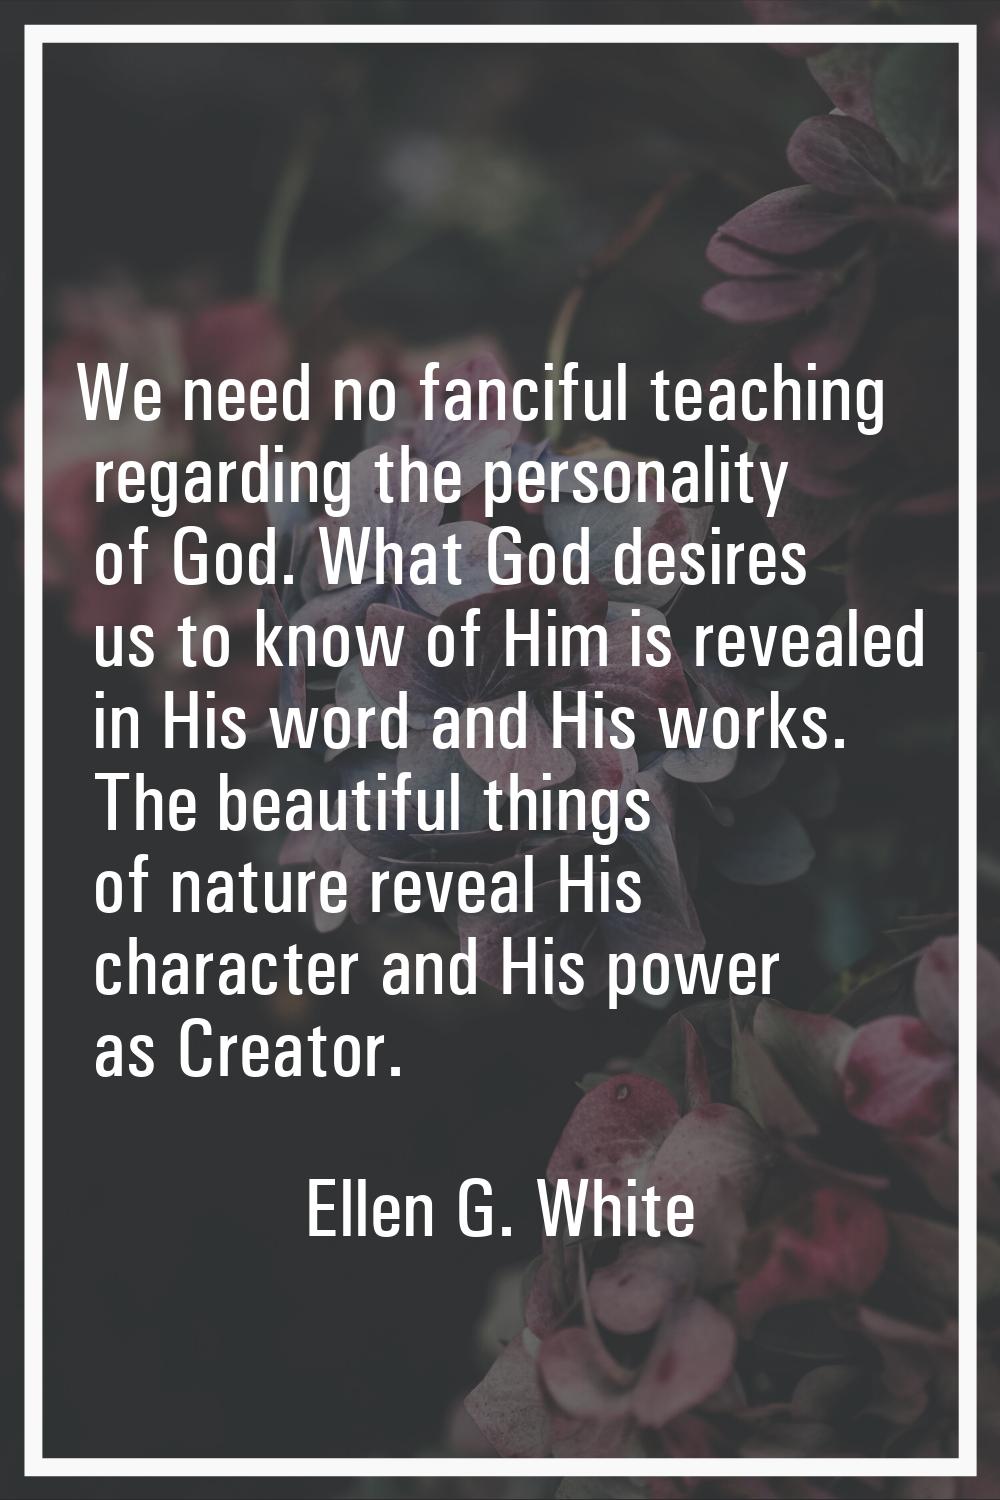 We need no fanciful teaching regarding the personality of God. What God desires us to know of Him i